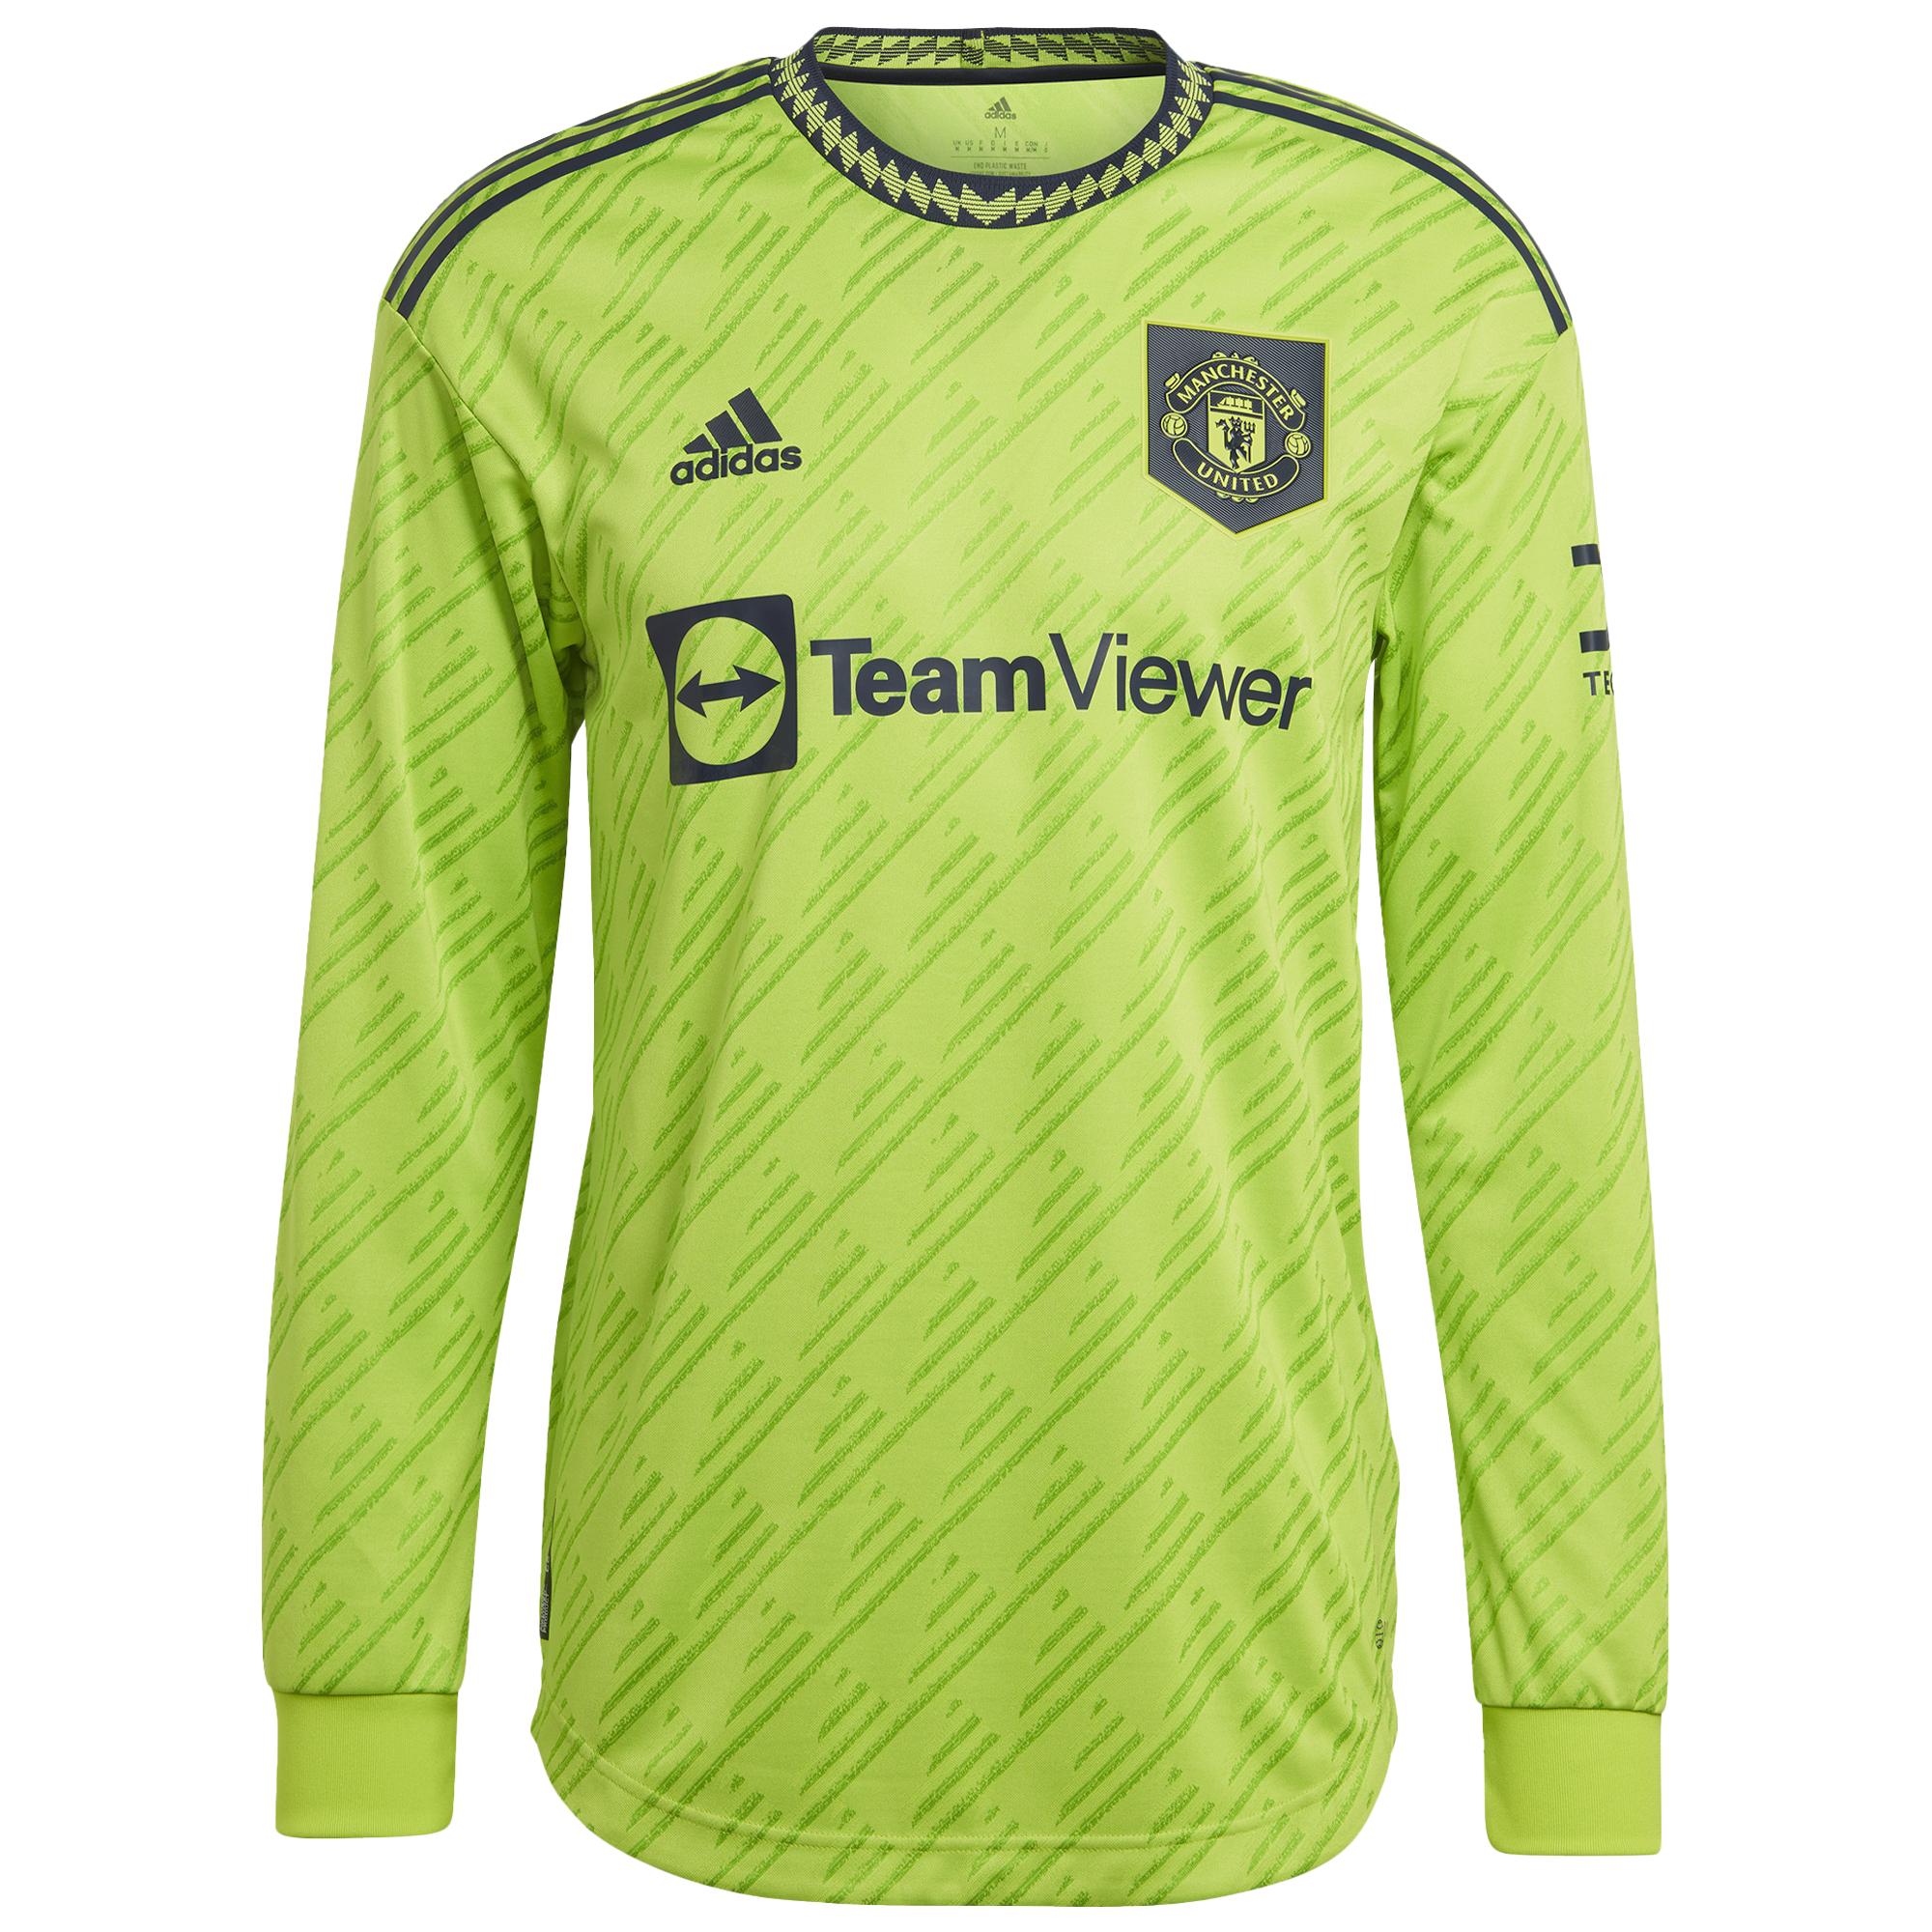 Manchester United Cup Third Authentic Shirt 2022-23 - Long Sleeve with Bøe Risa 8 printing